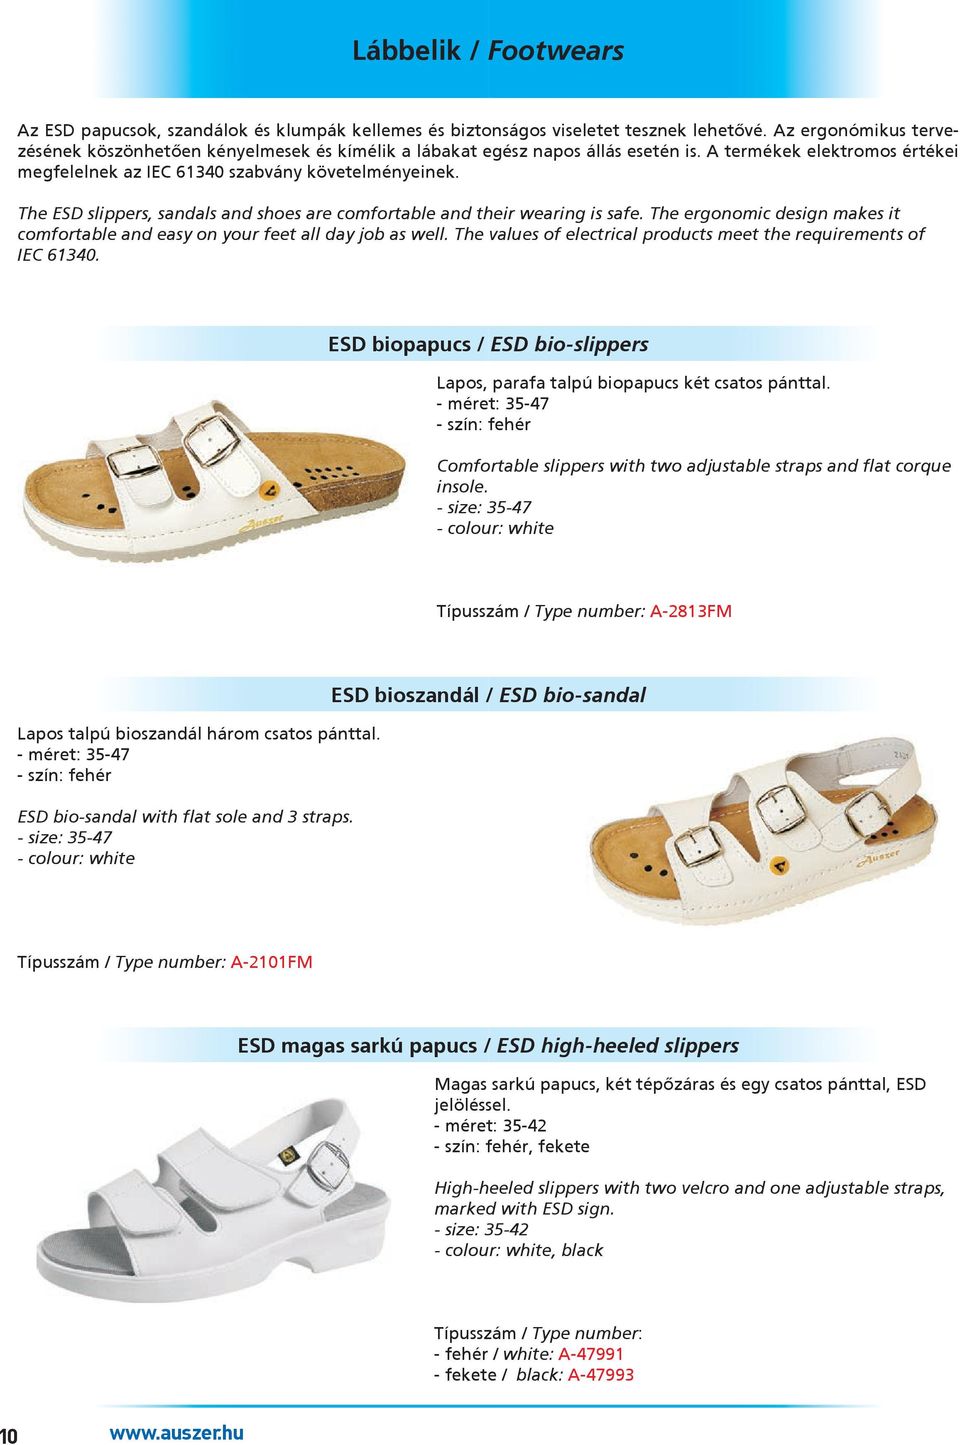 The ESD slippers, sandals and shoes are comfortable and their wearing is safe. The ergonomic design makes it comfortable and easy on your feet all day job as well.